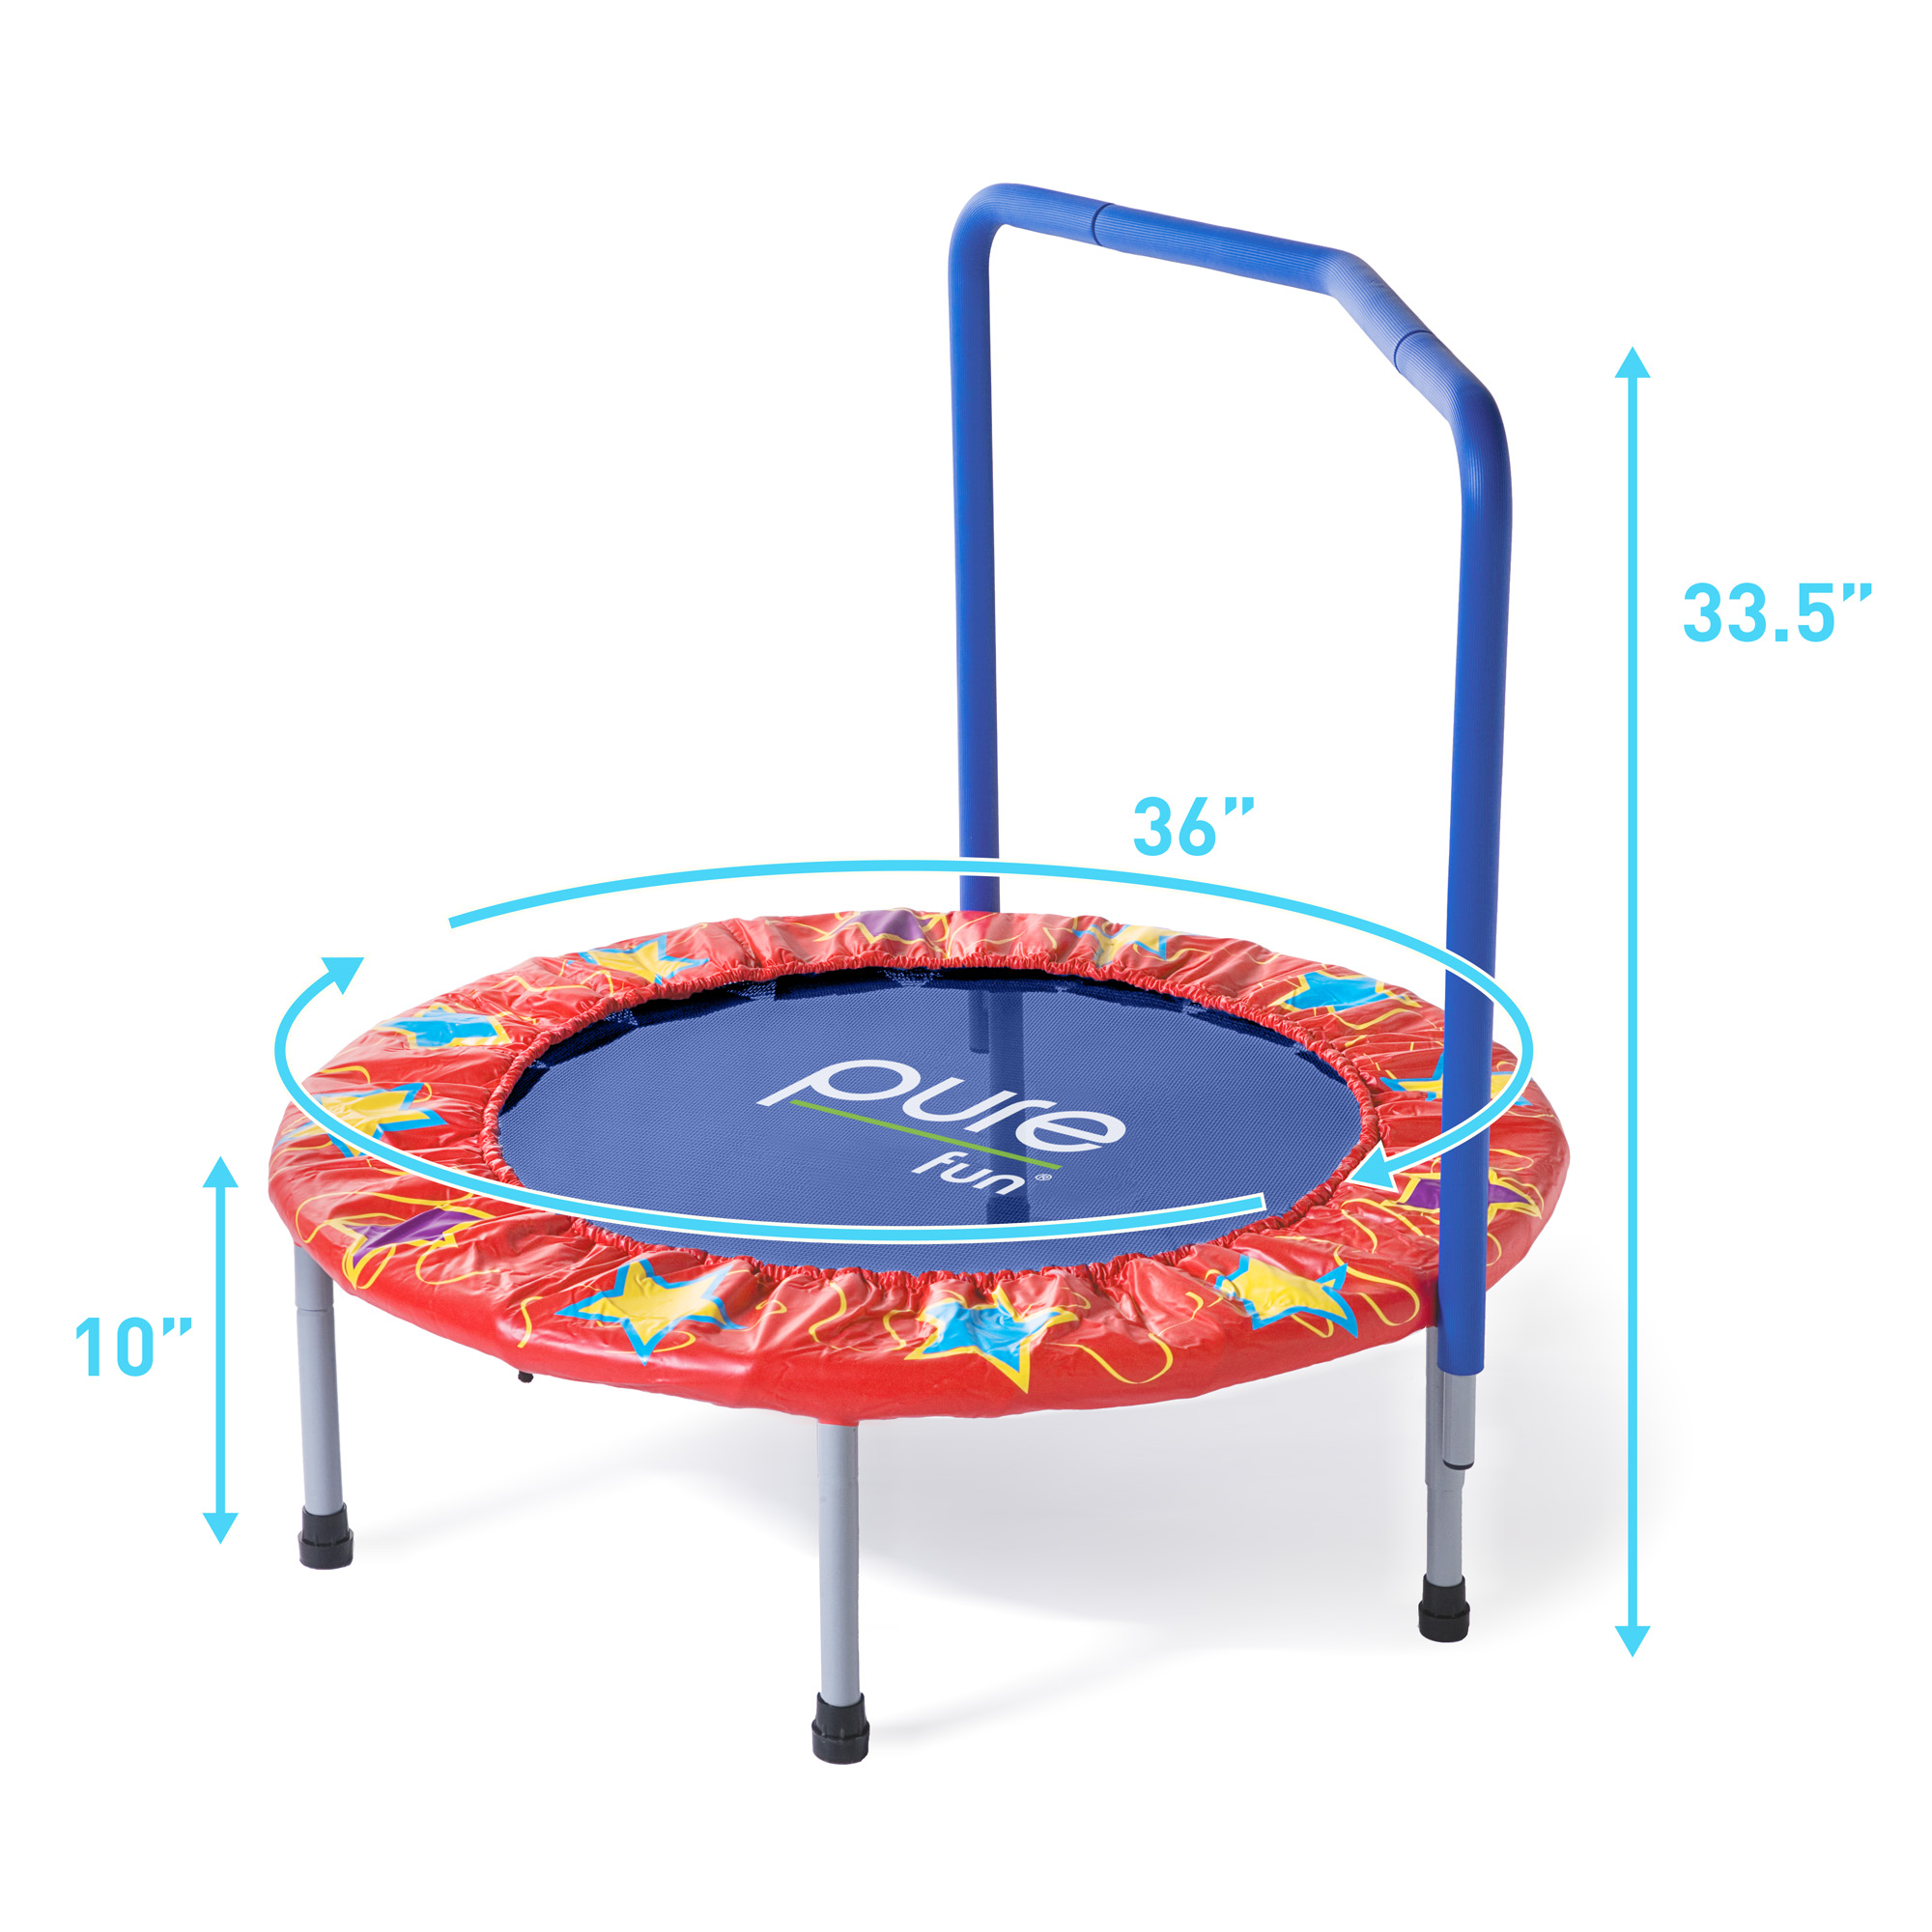 Pure Fun 36-Inch Trampoline for Kids, with Handrail, Red/Blue - image 2 of 4